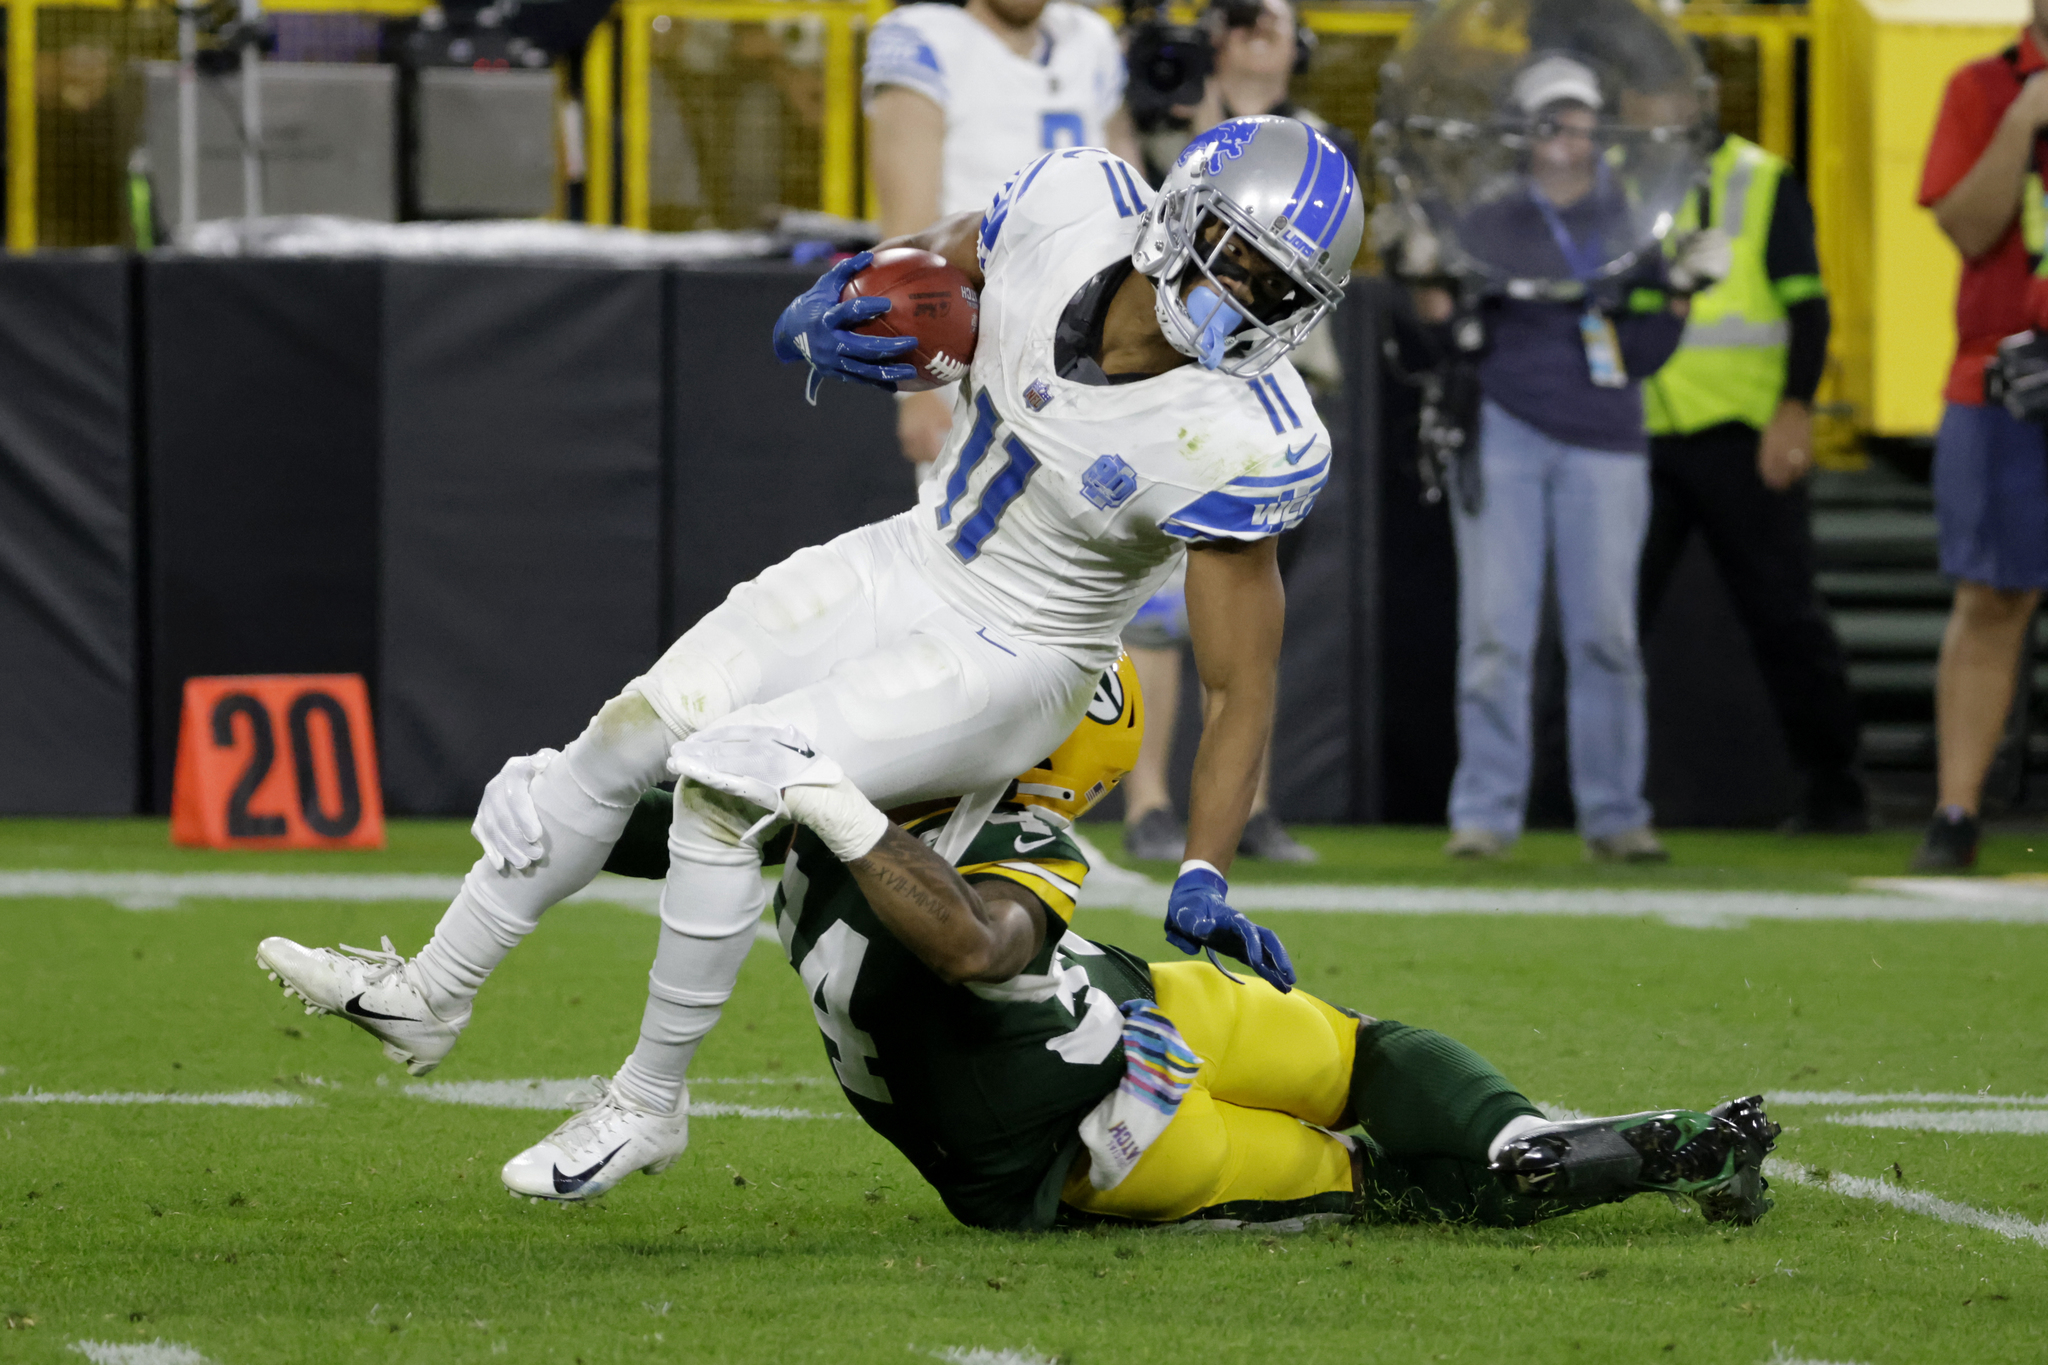 Detroit Lions wide receiver Kalif Raymond (11) is tackled by Green Bay Packers safety Jonathan Owens (34) after catching a pass during the first half of an NFL football game, Thursday, Sept. 28, 2023, in Green Bay, Wis. (AP Photo/Mike Roemer)